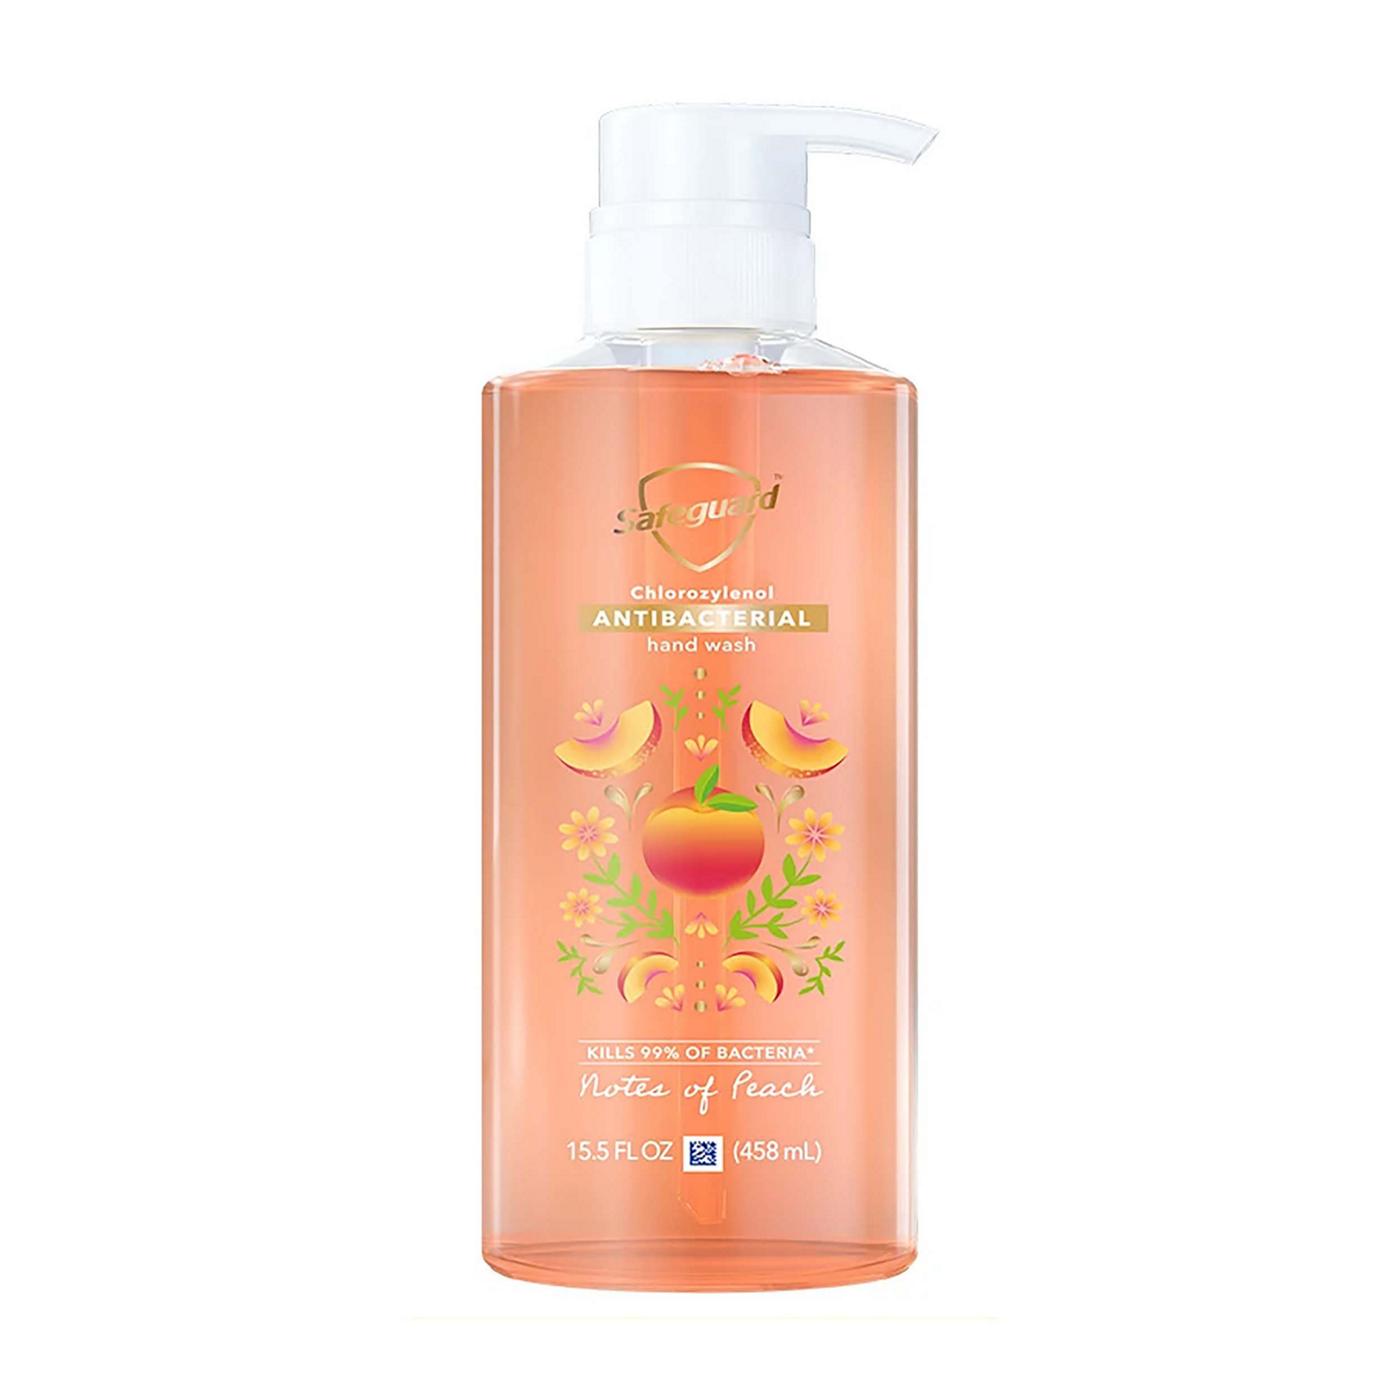 Safeguard Antibacterial Hand Soap - Notes Of Peach; image 1 of 6